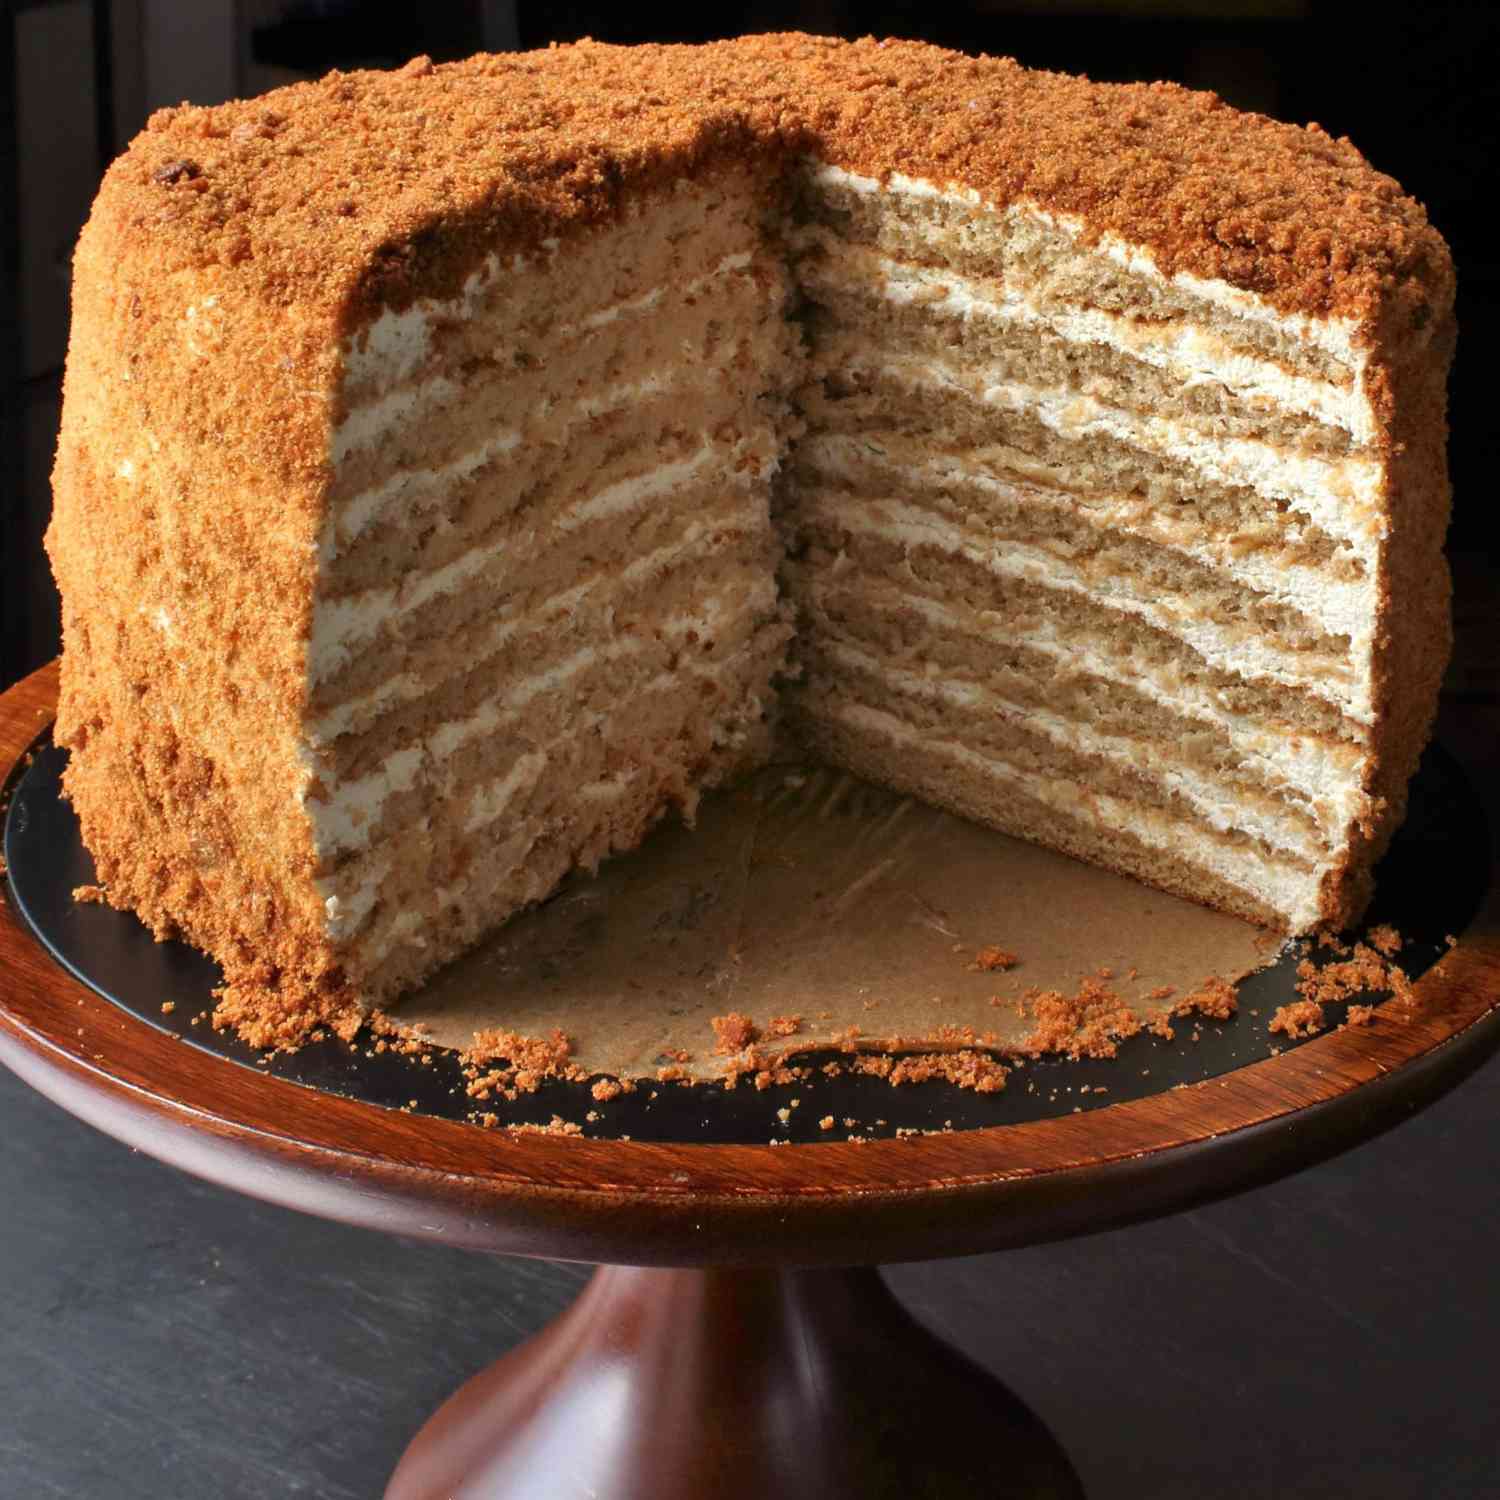 Russian Honey Cake on a wooden cake stand